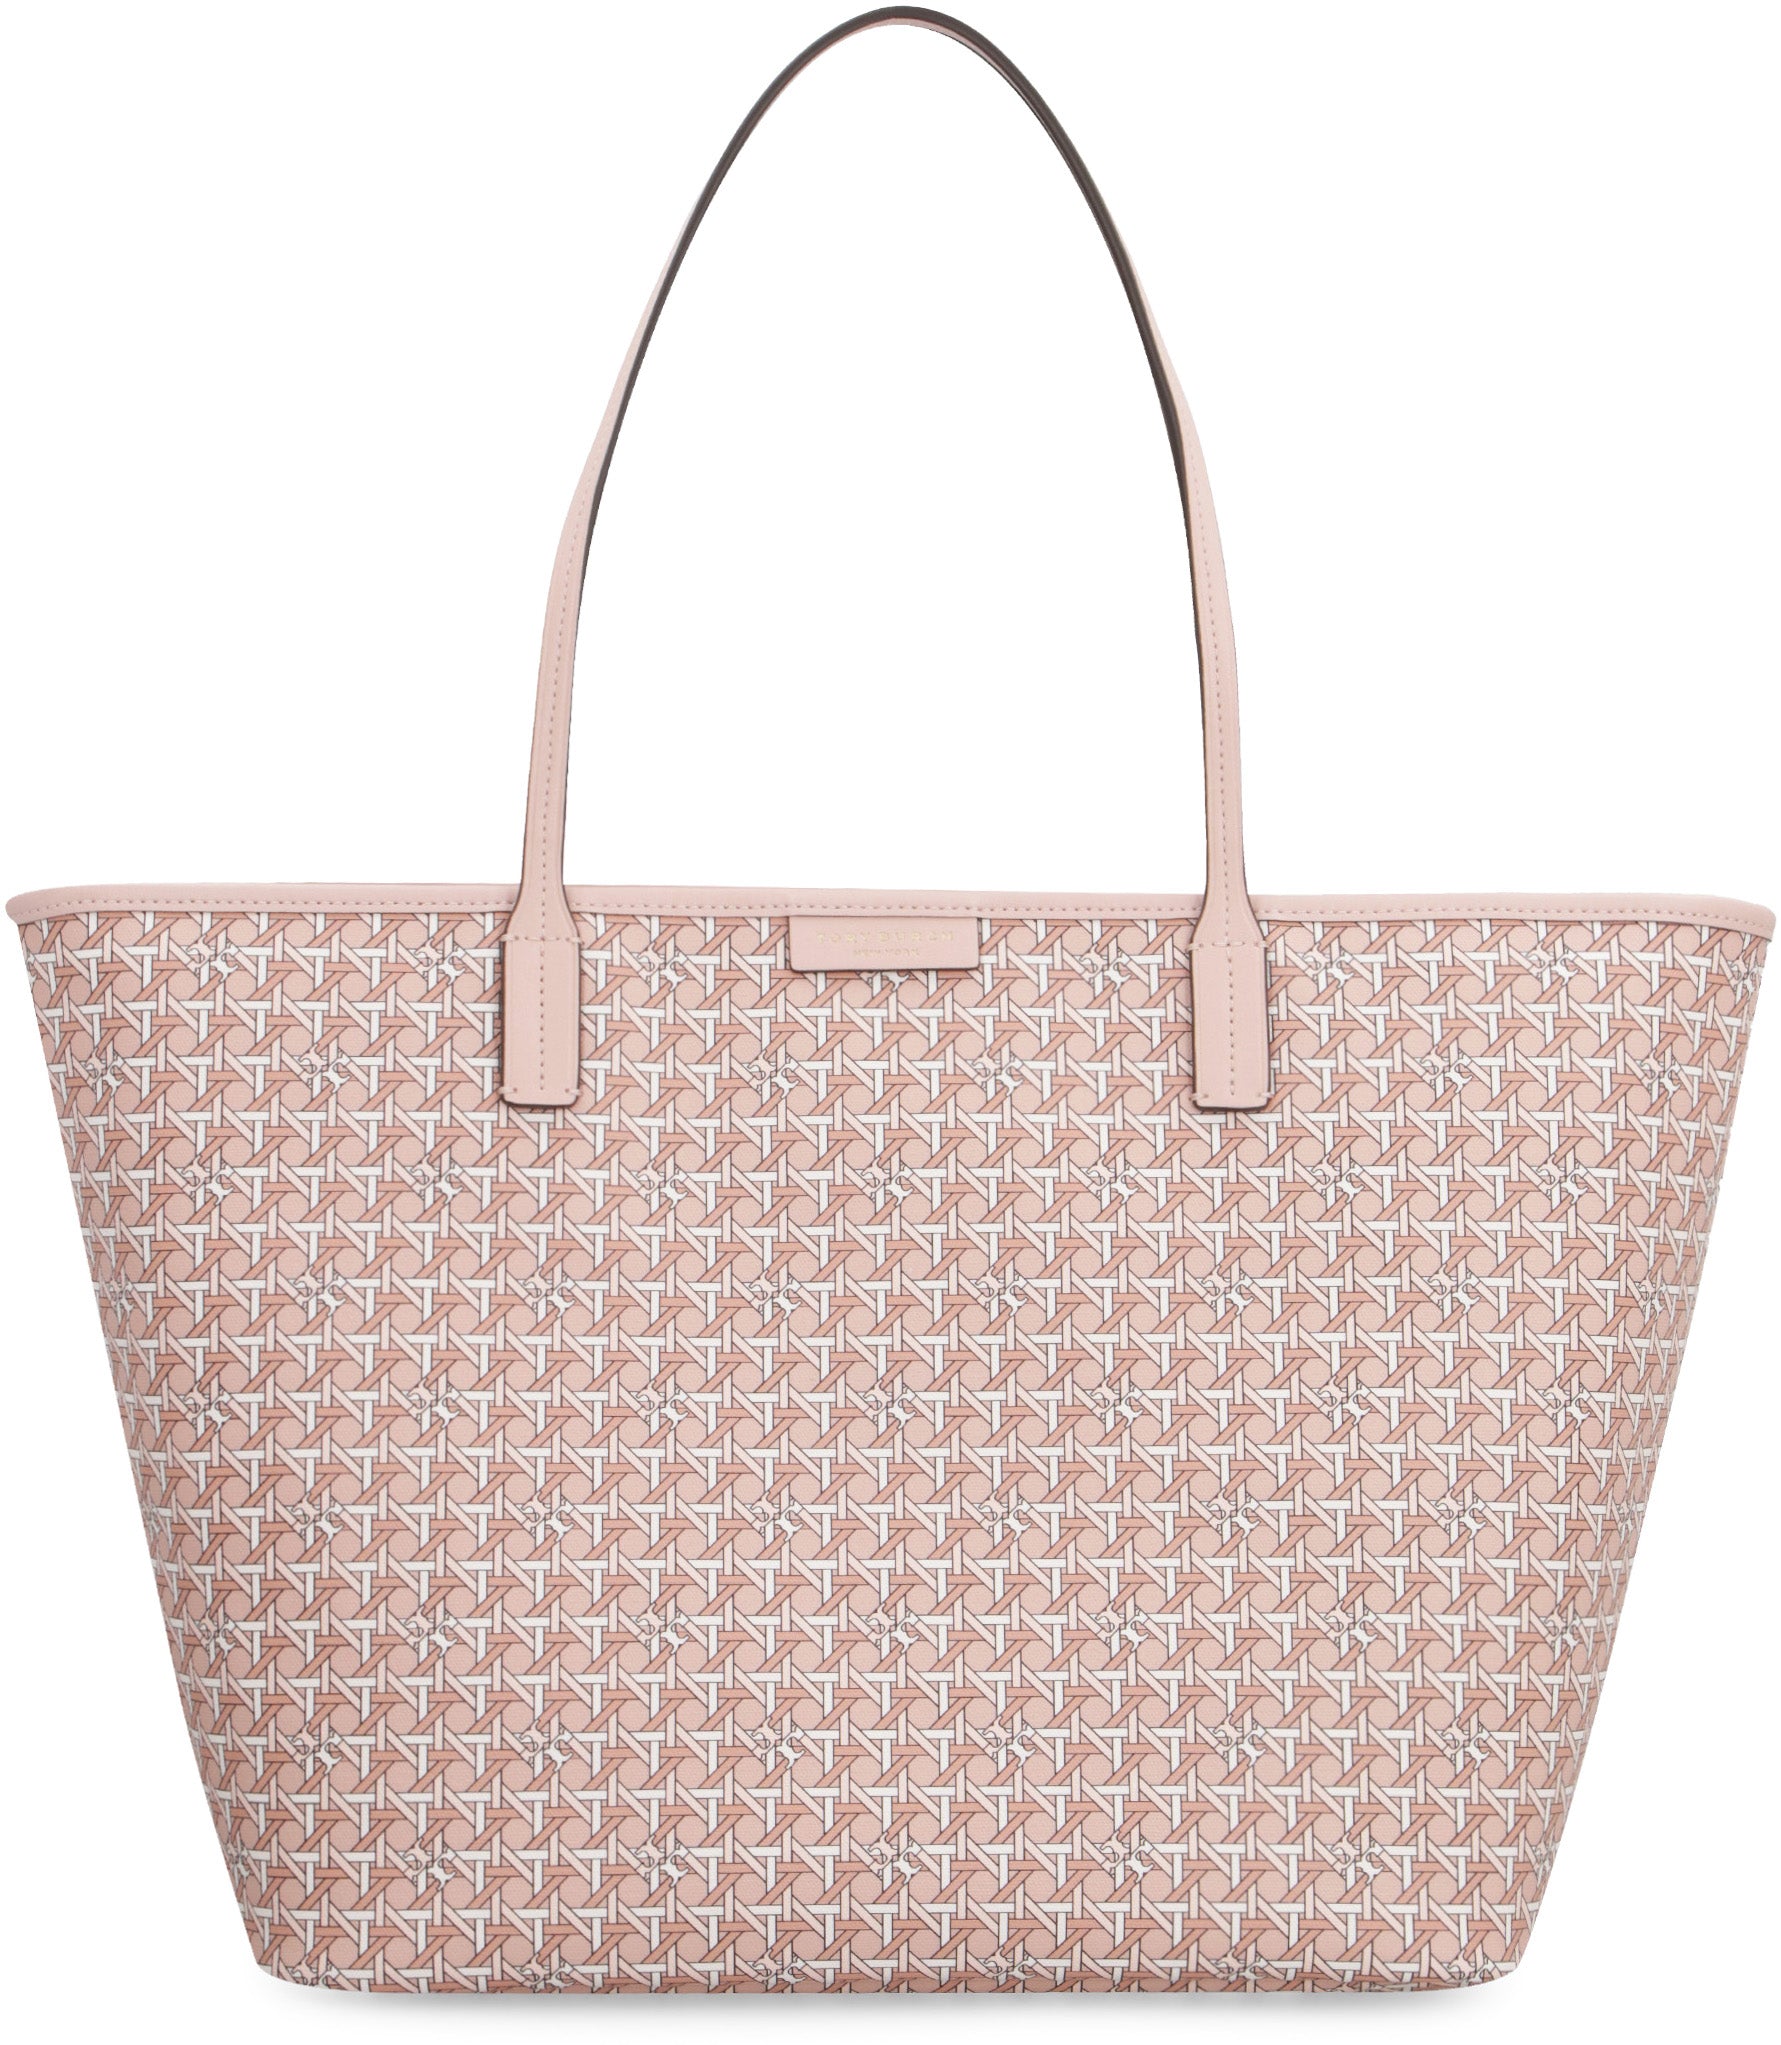 Tory Burch - Ever-Ready tote bag Pink - The Corner